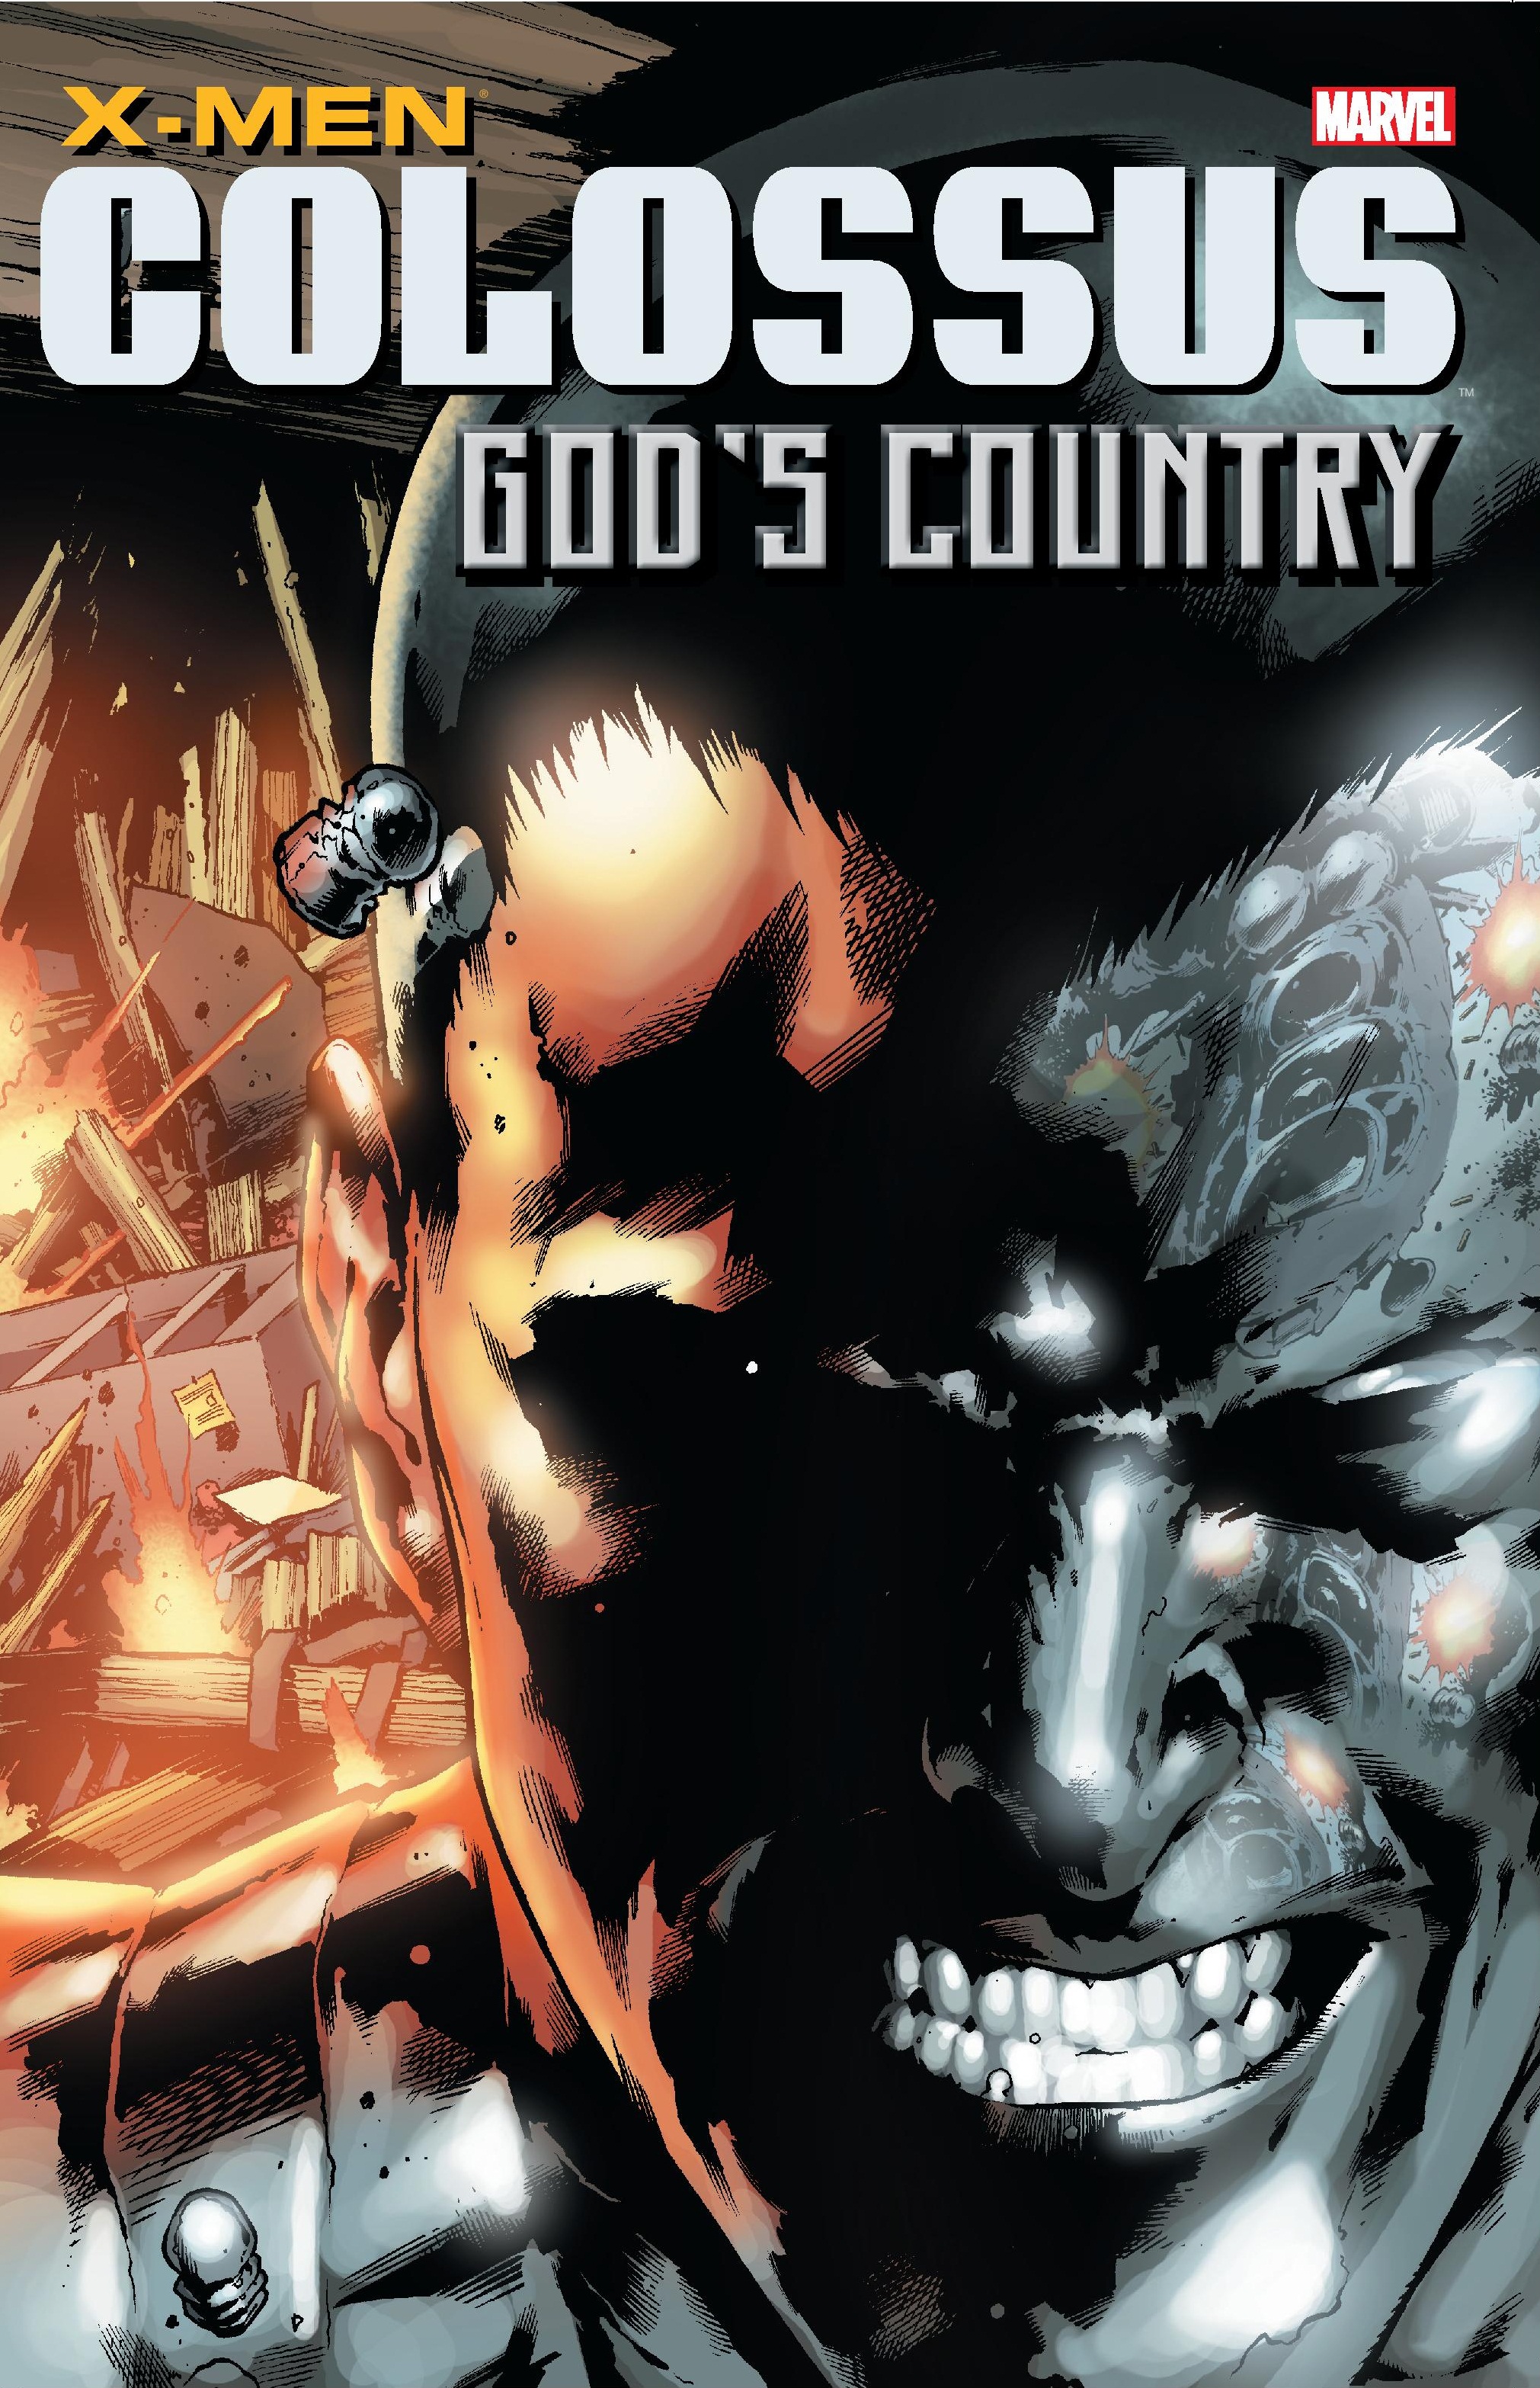 X-Men: Colossus - God's Country (Trade Paperback)